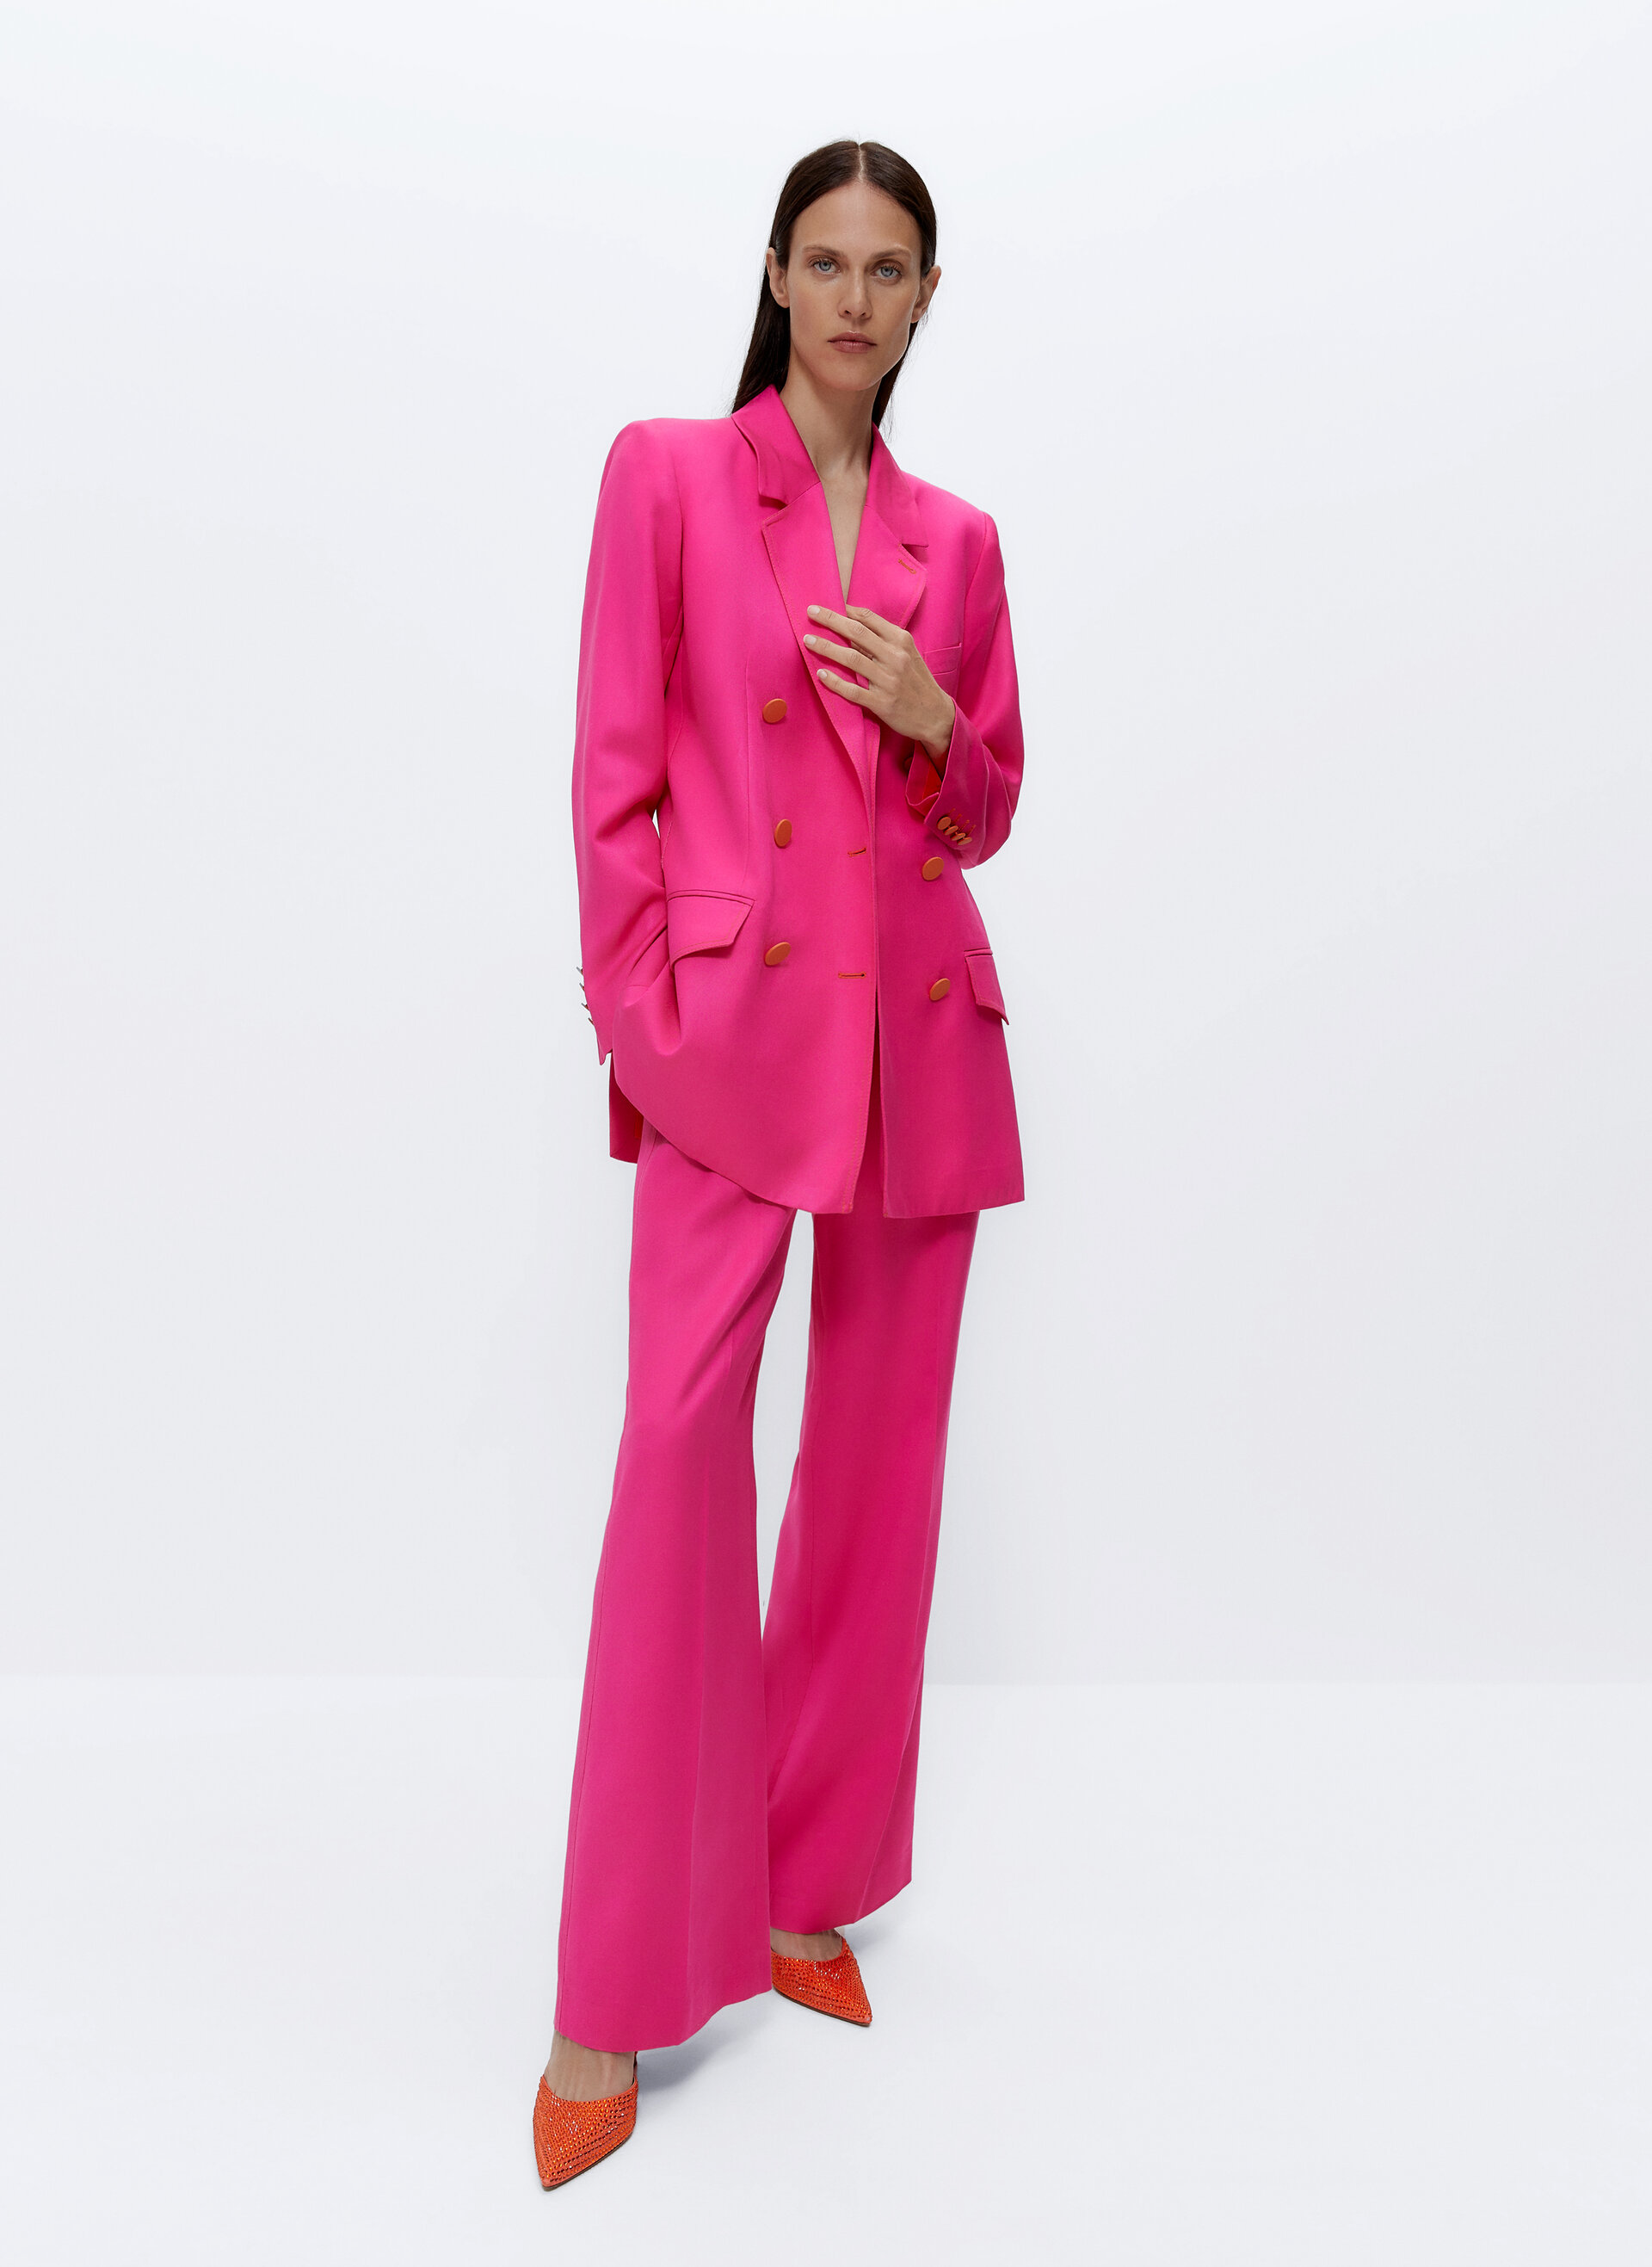 Uterque LONG FUCHSIA double breasted BLAZER with pink buttons and flap side pockets. 